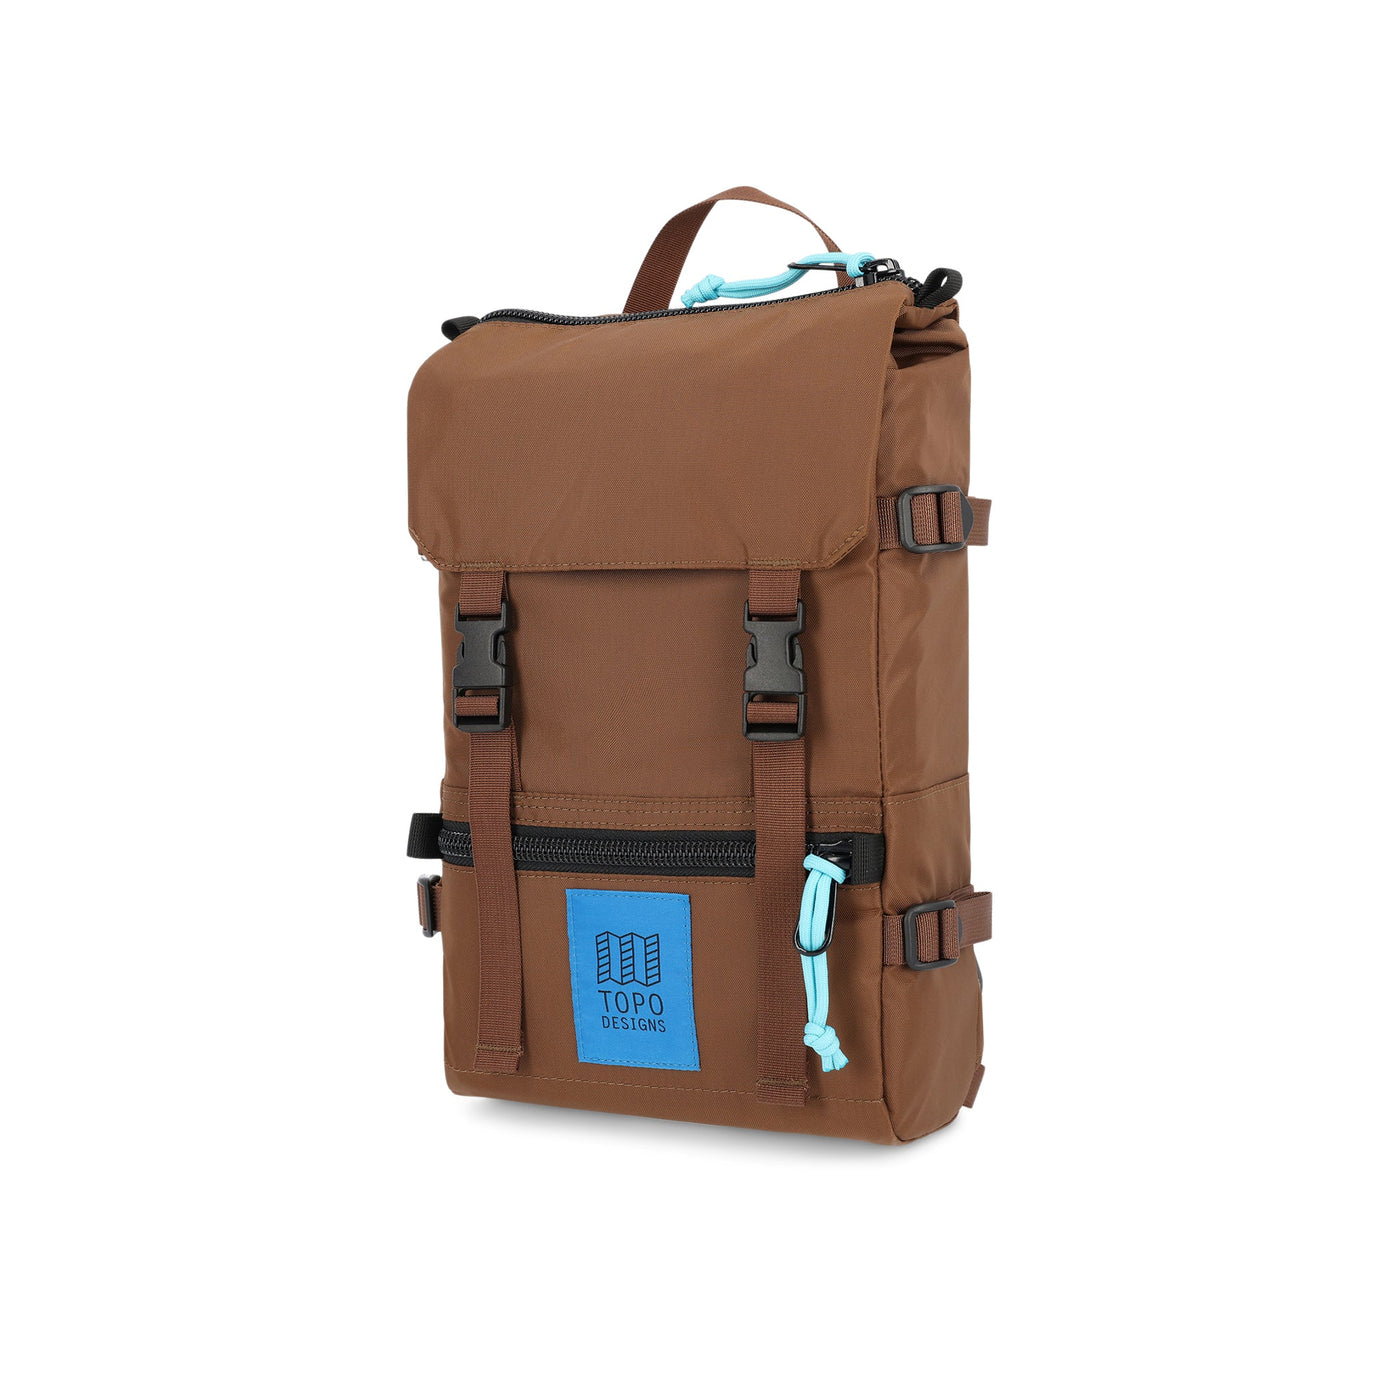 Topo Designs Rover Pack Mini backpack in recycled "Cocoa" brown